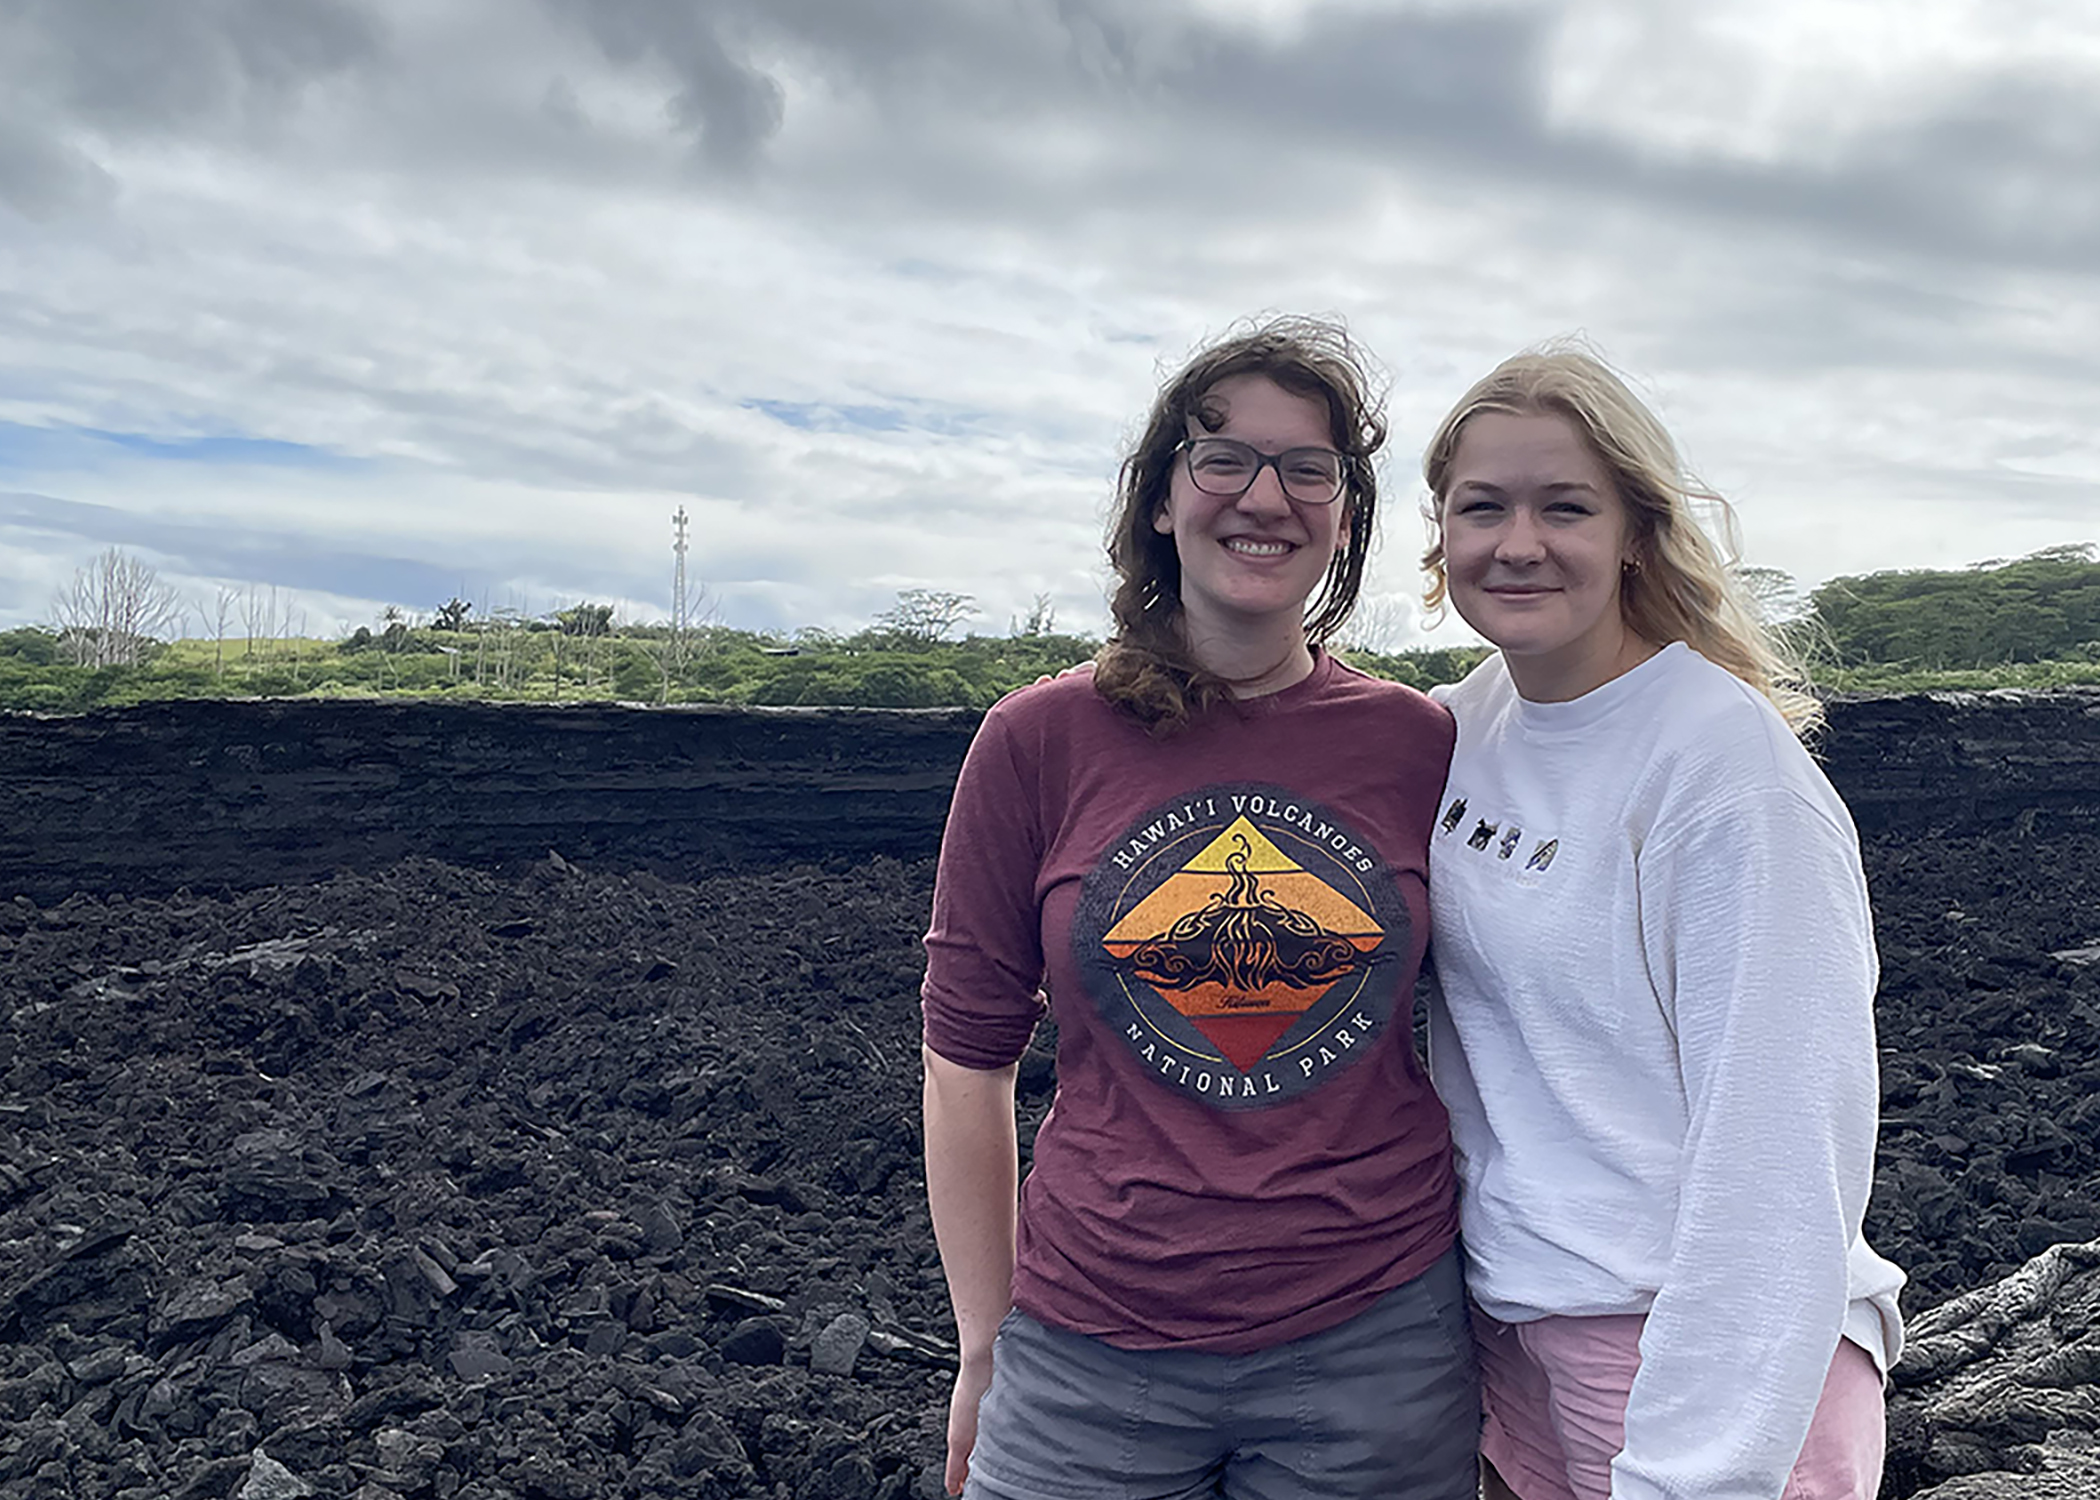 Ellie and Madison at Geo Fieldcamp in Hawaii